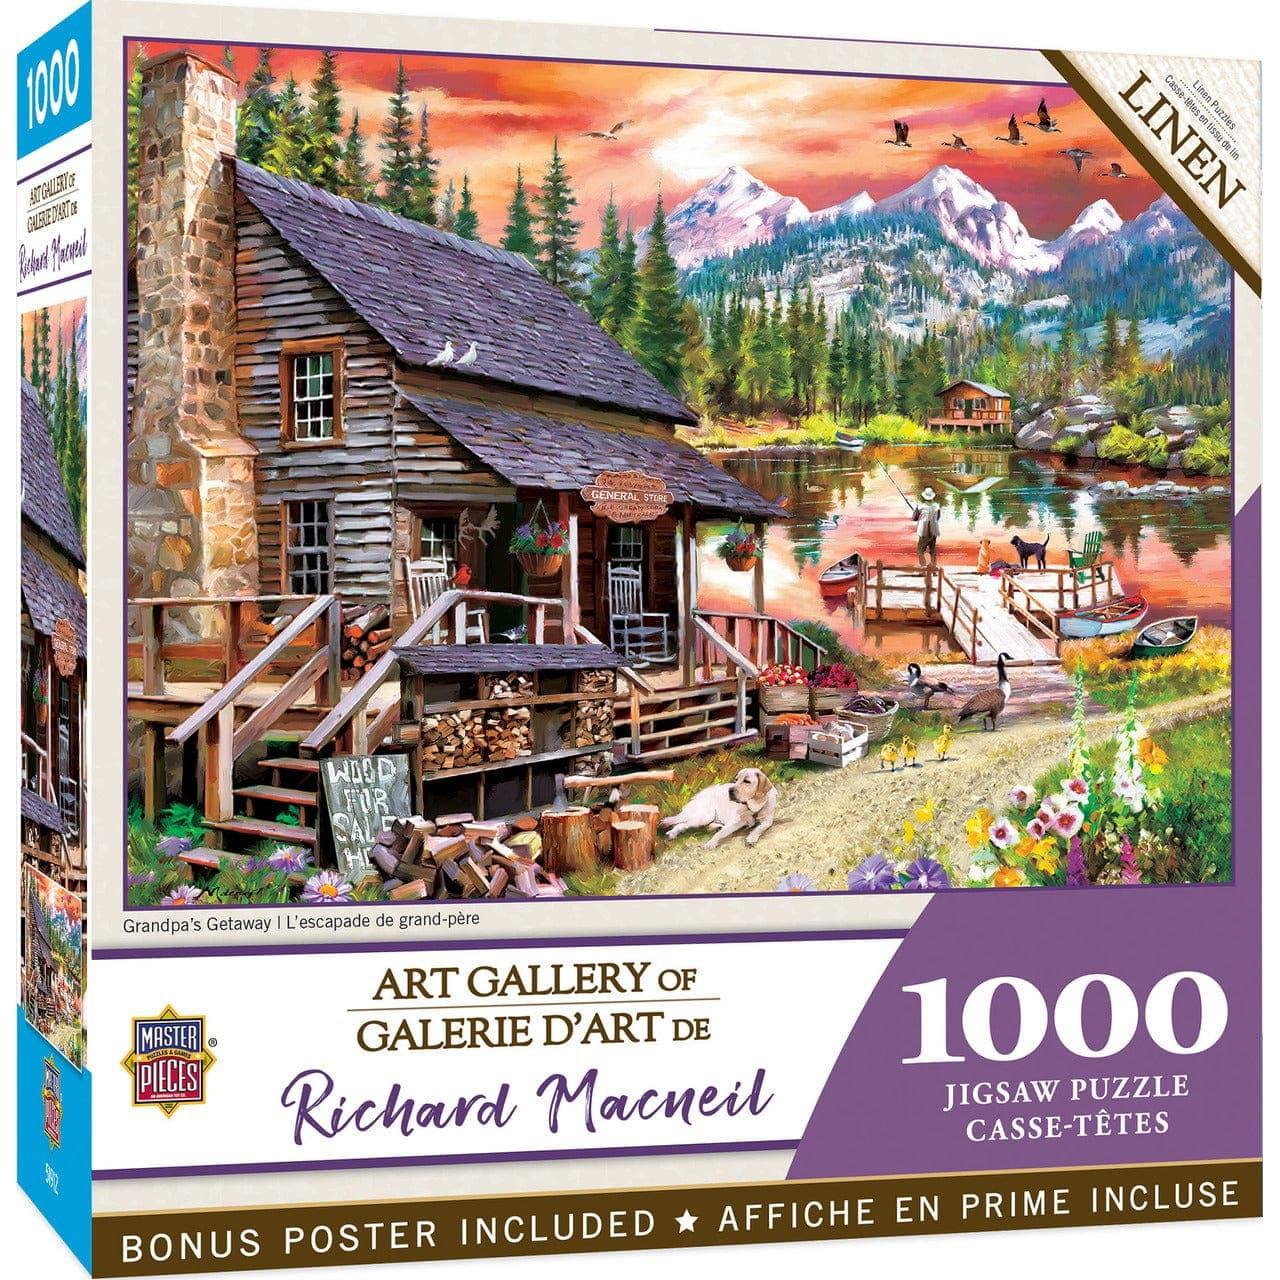 Grand Library Jigsaw Puzzles 1000 Piece, Puzzle For Adults